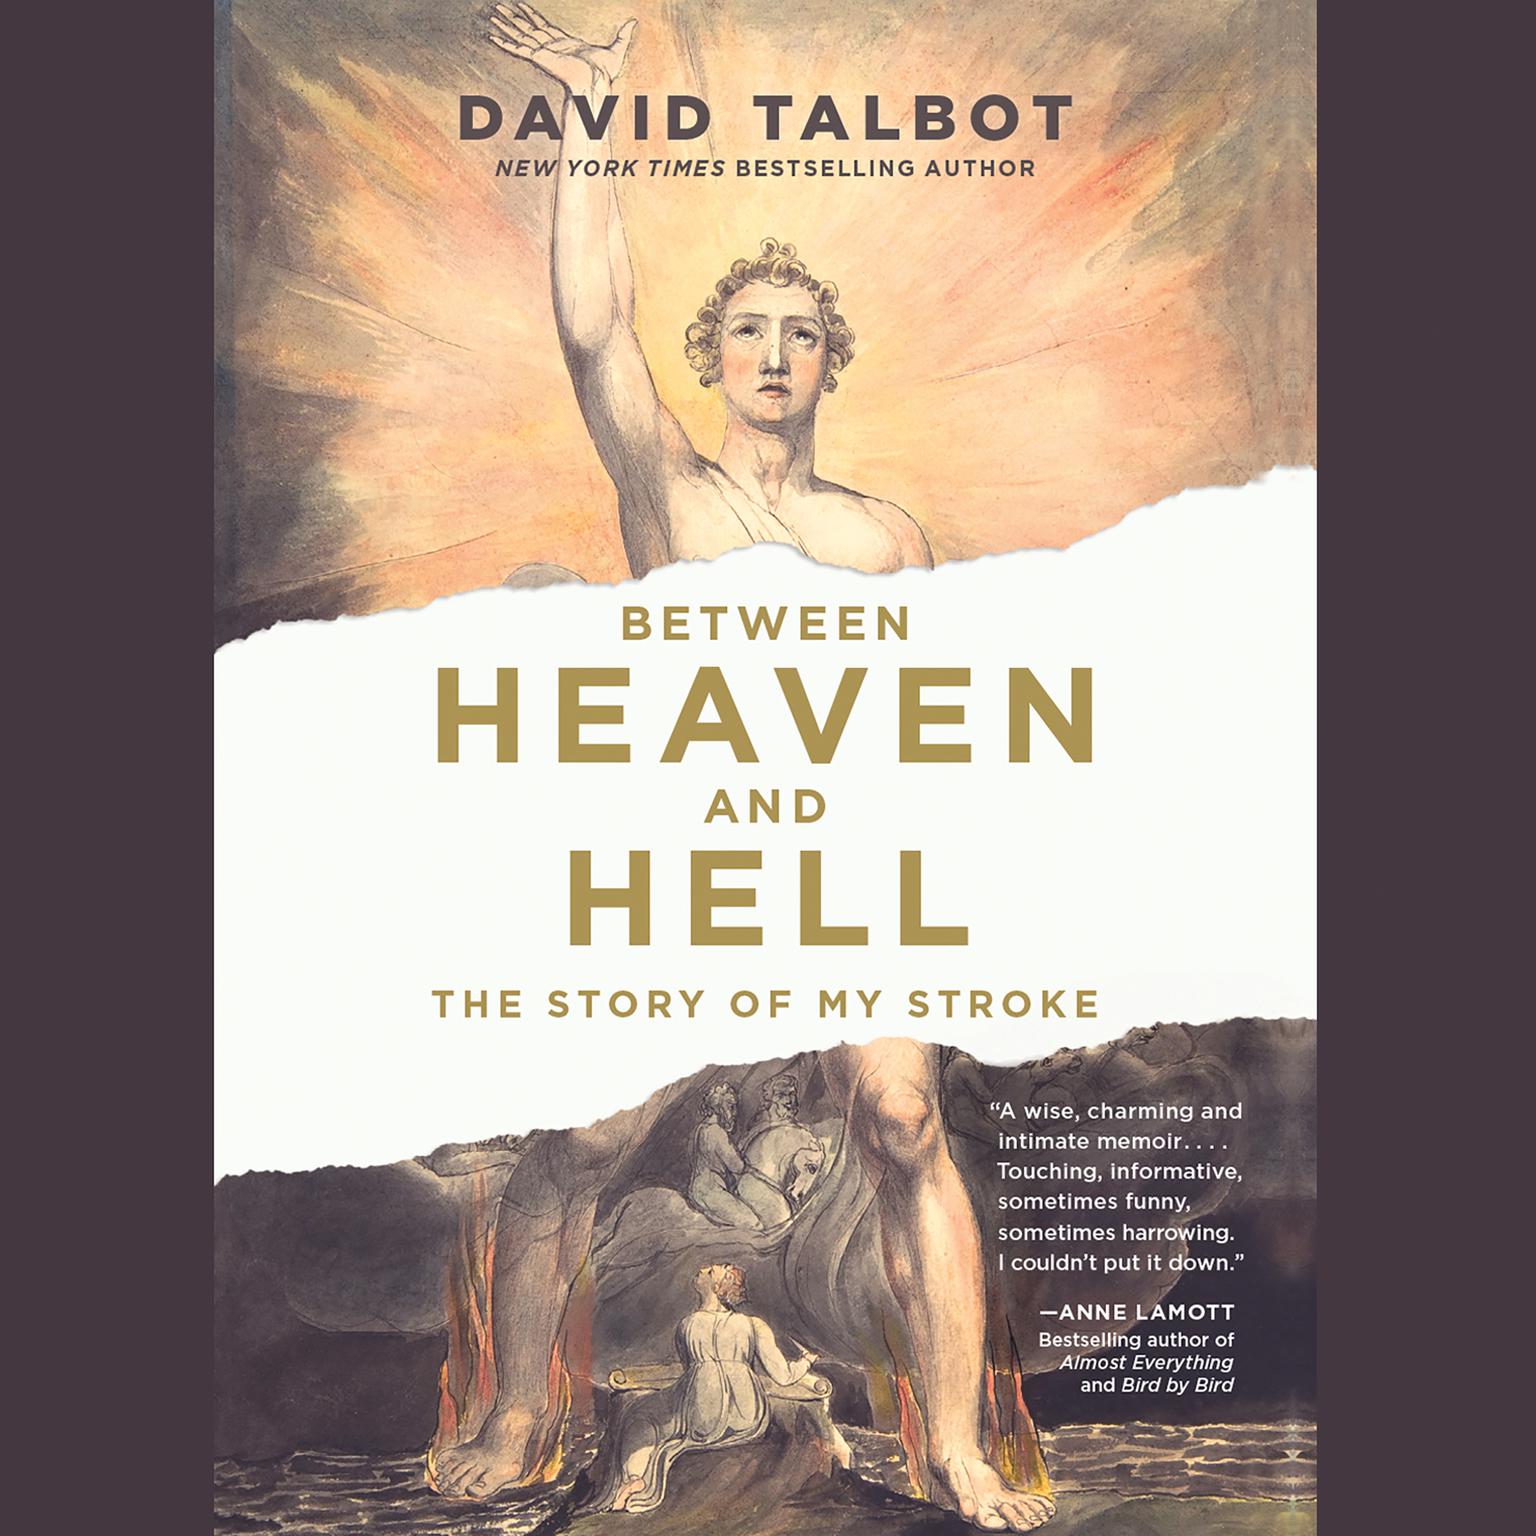 Between Heaven and Hell: The Story of My Stroke (Inspirational Memoir, Stroke Recovery Book, Near Death Experiences) Audiobook, by David Talbot